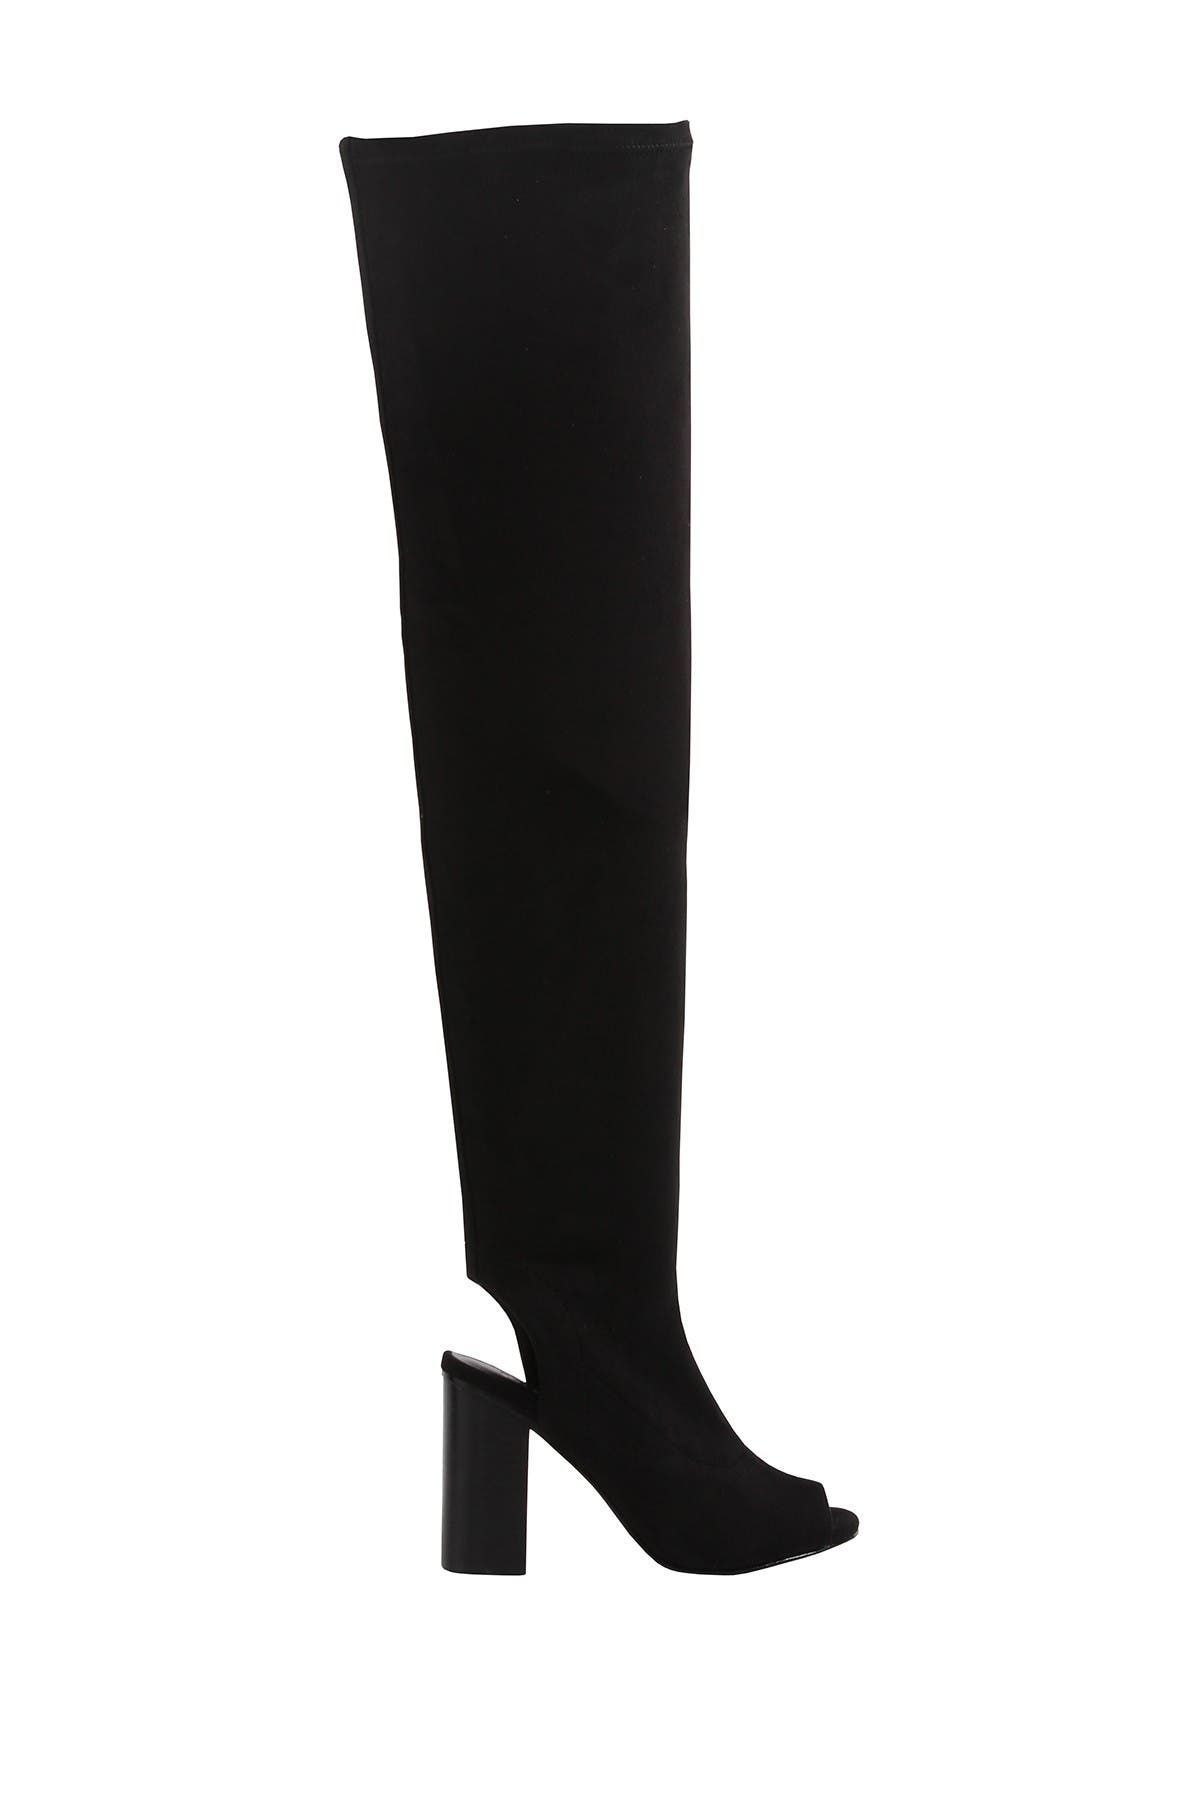 MIA | Robyn Over-the-Knee Boot 